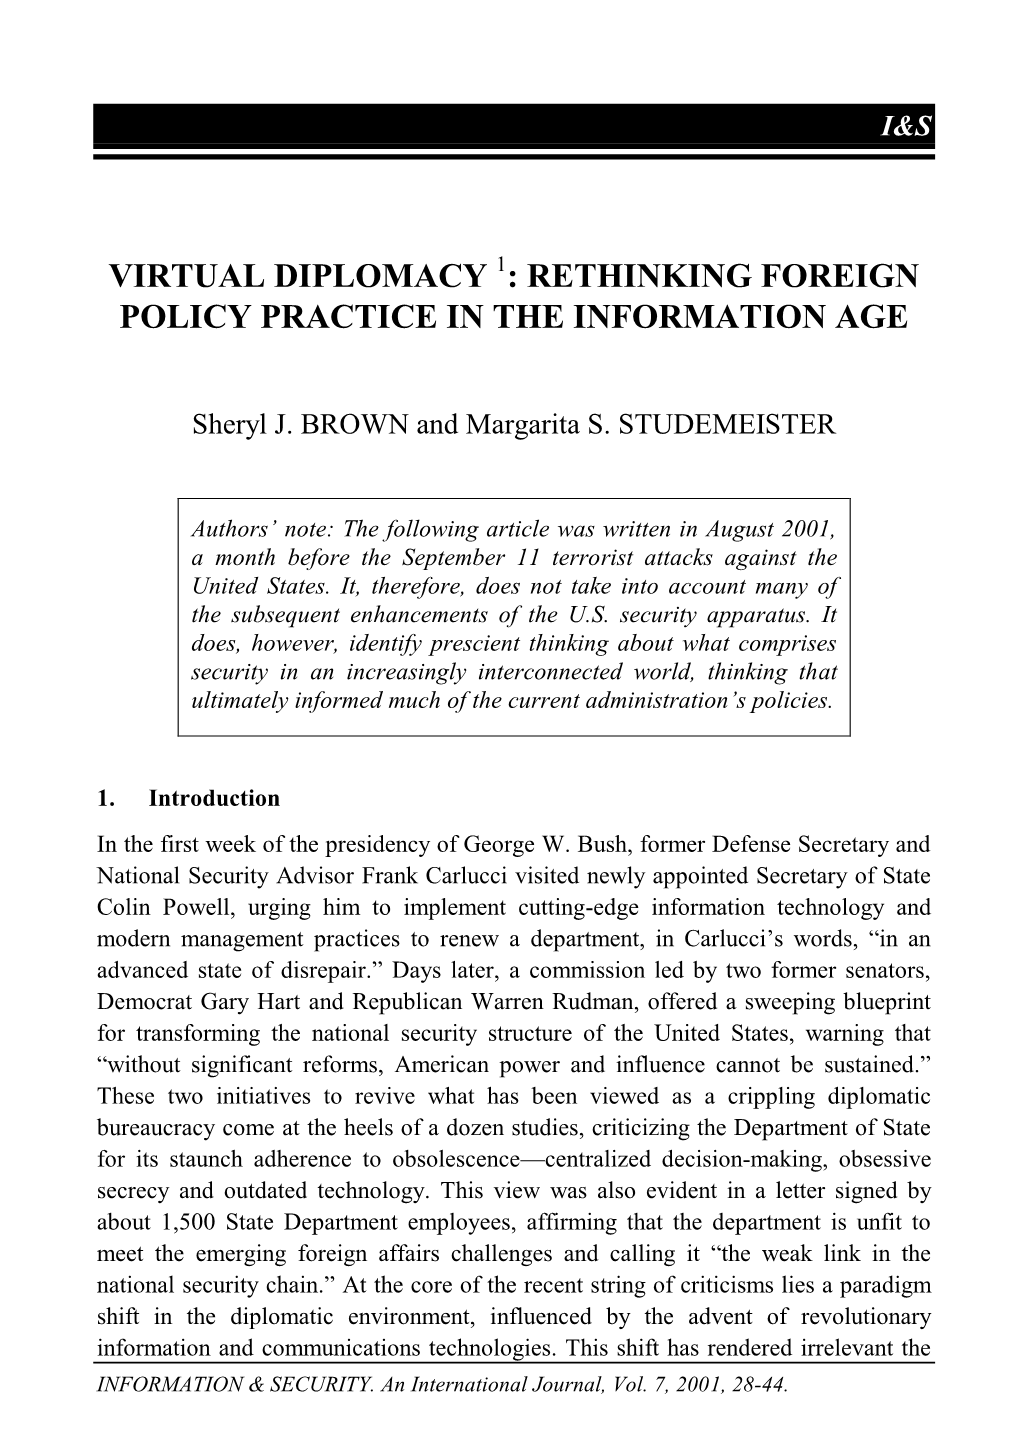 Virtual Diplomacy: Rethinking Foreign Policy Practice in the Information Age for States to Ignore